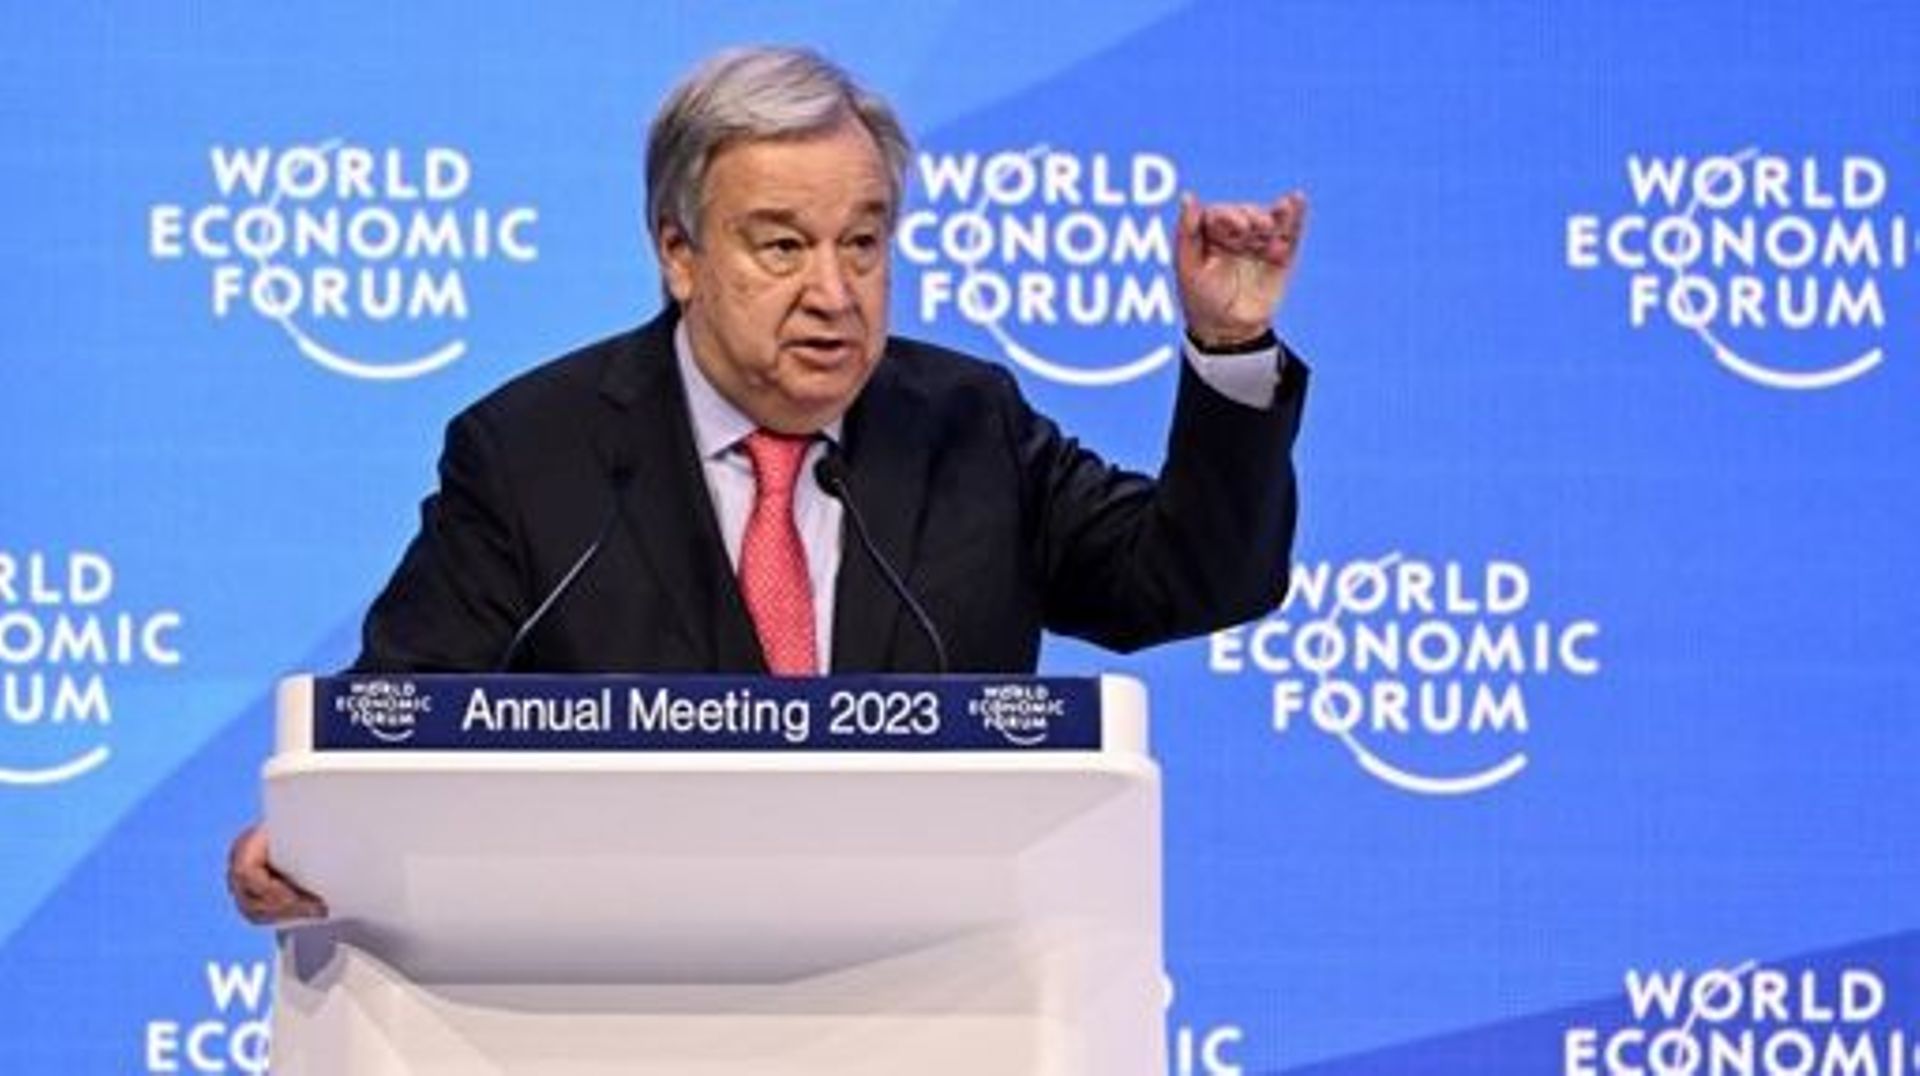 UN Secretary-General Antonio Guterres addresses a session of the World Economic Forum (WEF) annual meeting in Davos on January 18, 2023. Fabrice COFFRINI / AFP